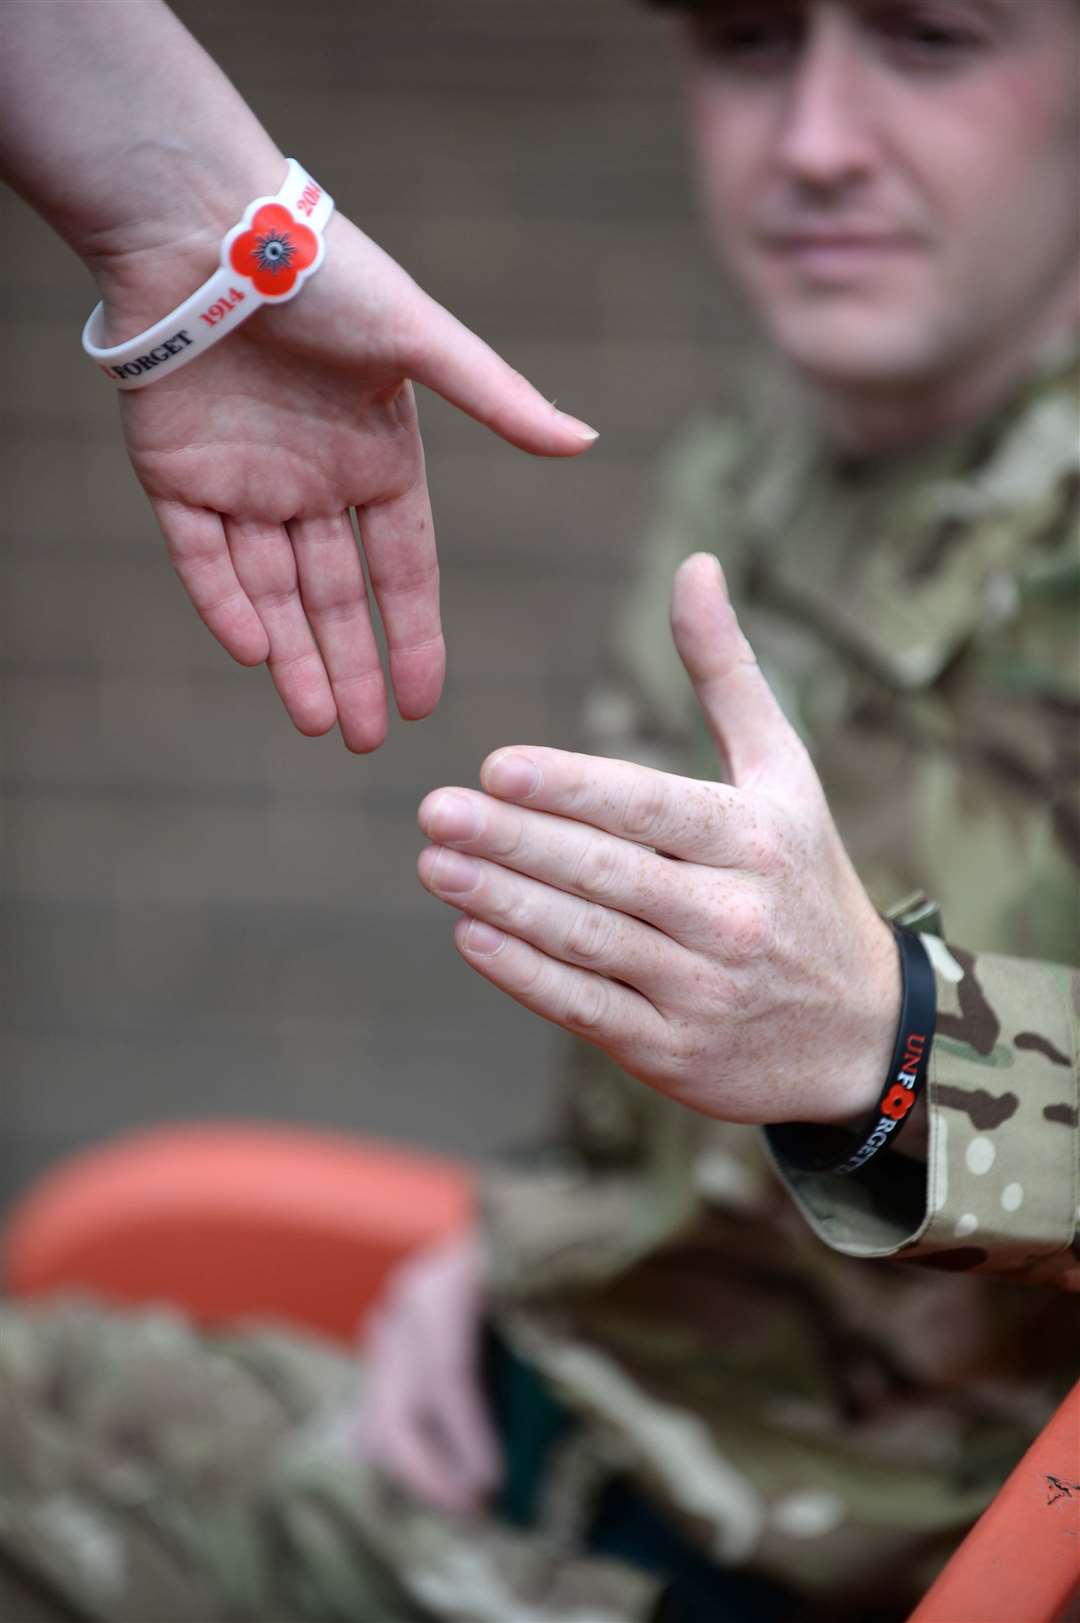 Charities like Poppyscotland will soon have a much more accurate picture of the size, location and profile of the Armed Forces community in Scotland.